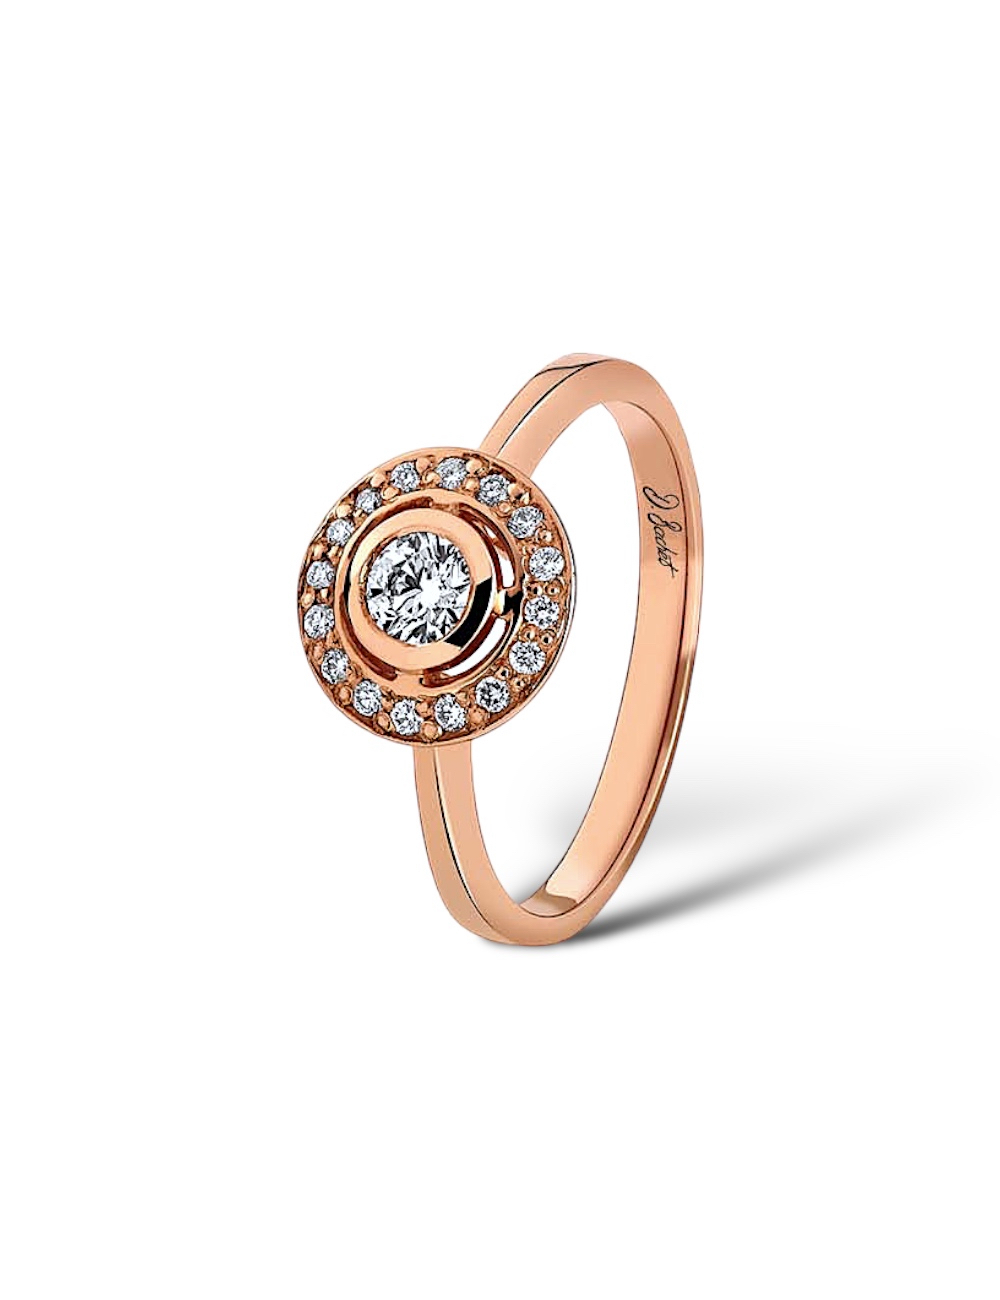 Rose gold halo ring with 0.30 ct central white diamond, symbolizing eternal love, epitome of elegance.